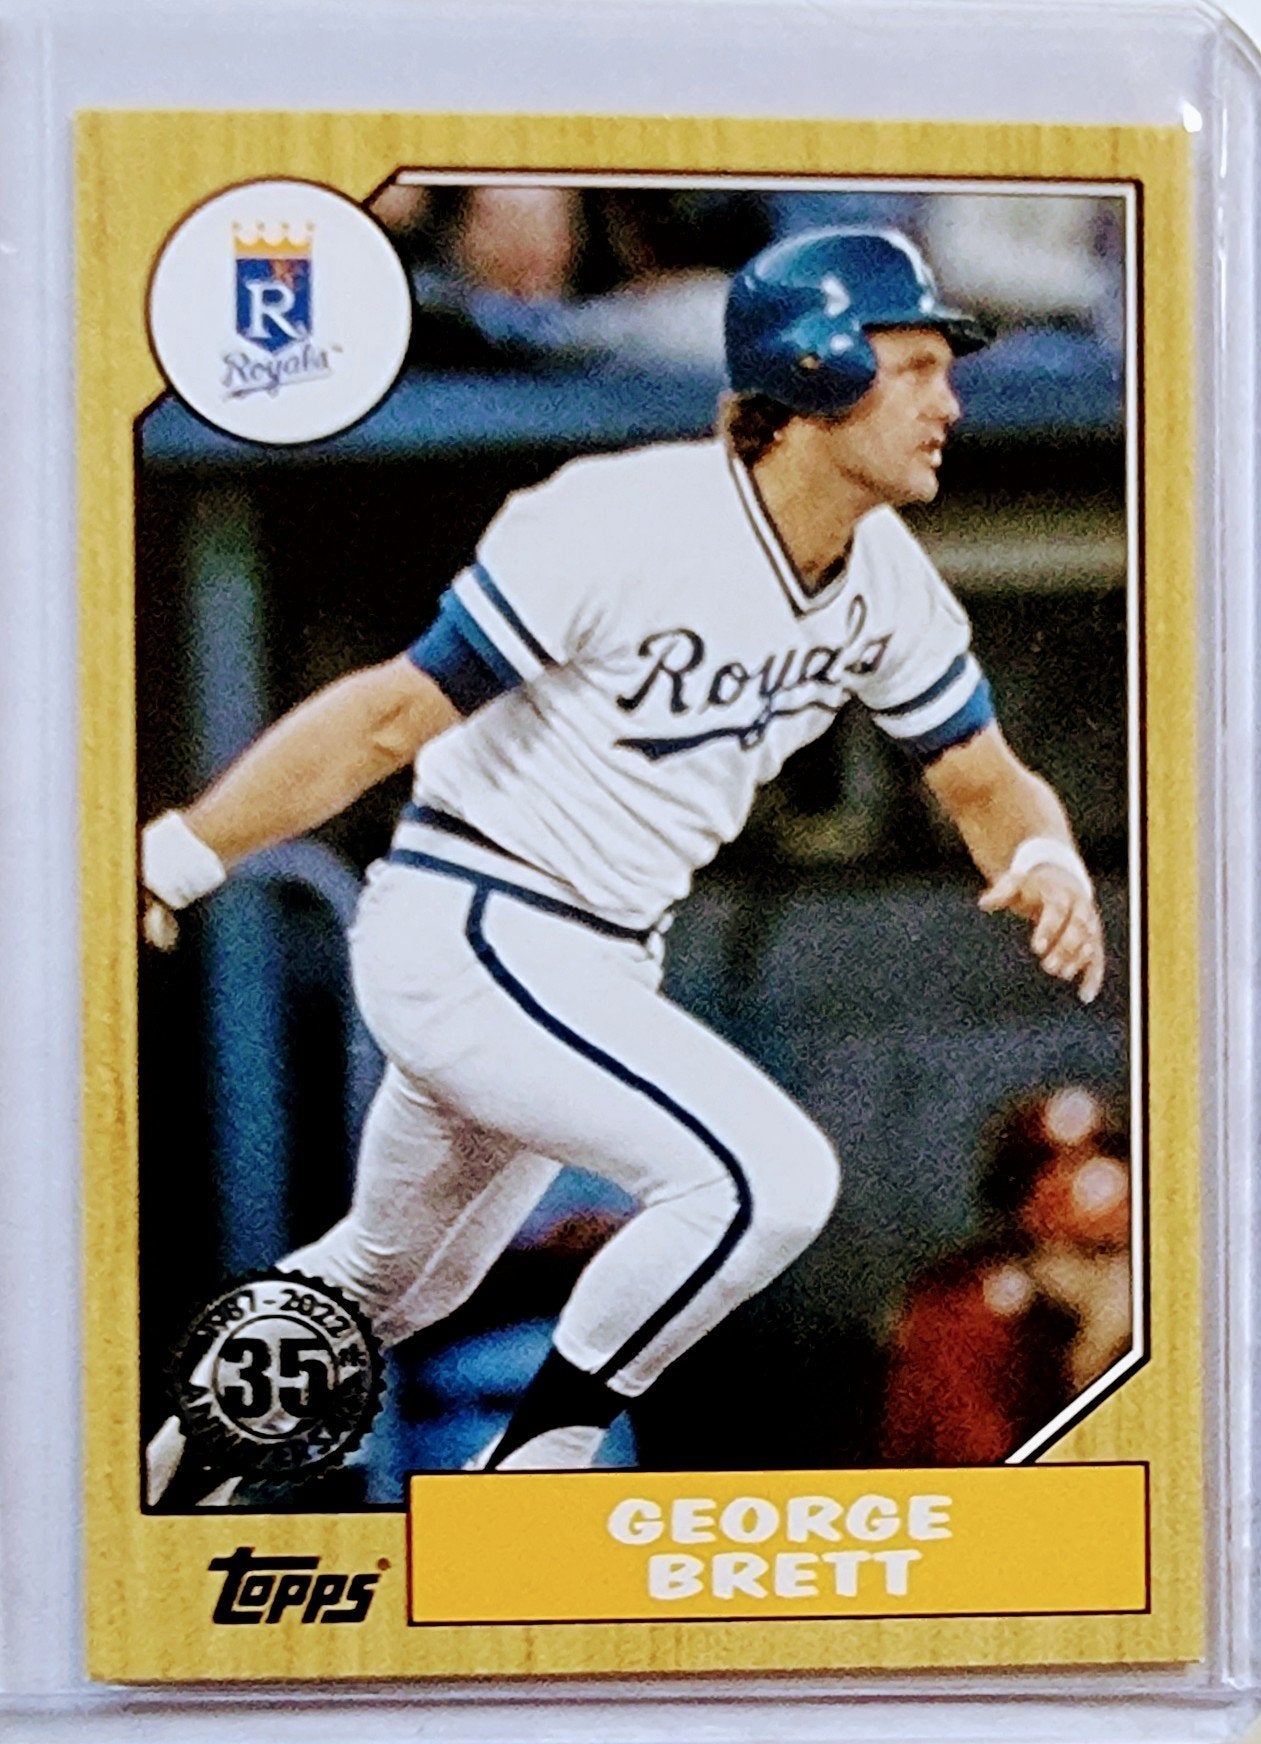 2022 Topps George Brett 1987 35th Anniversary Baseball Card simple Xclusive Collectibles   